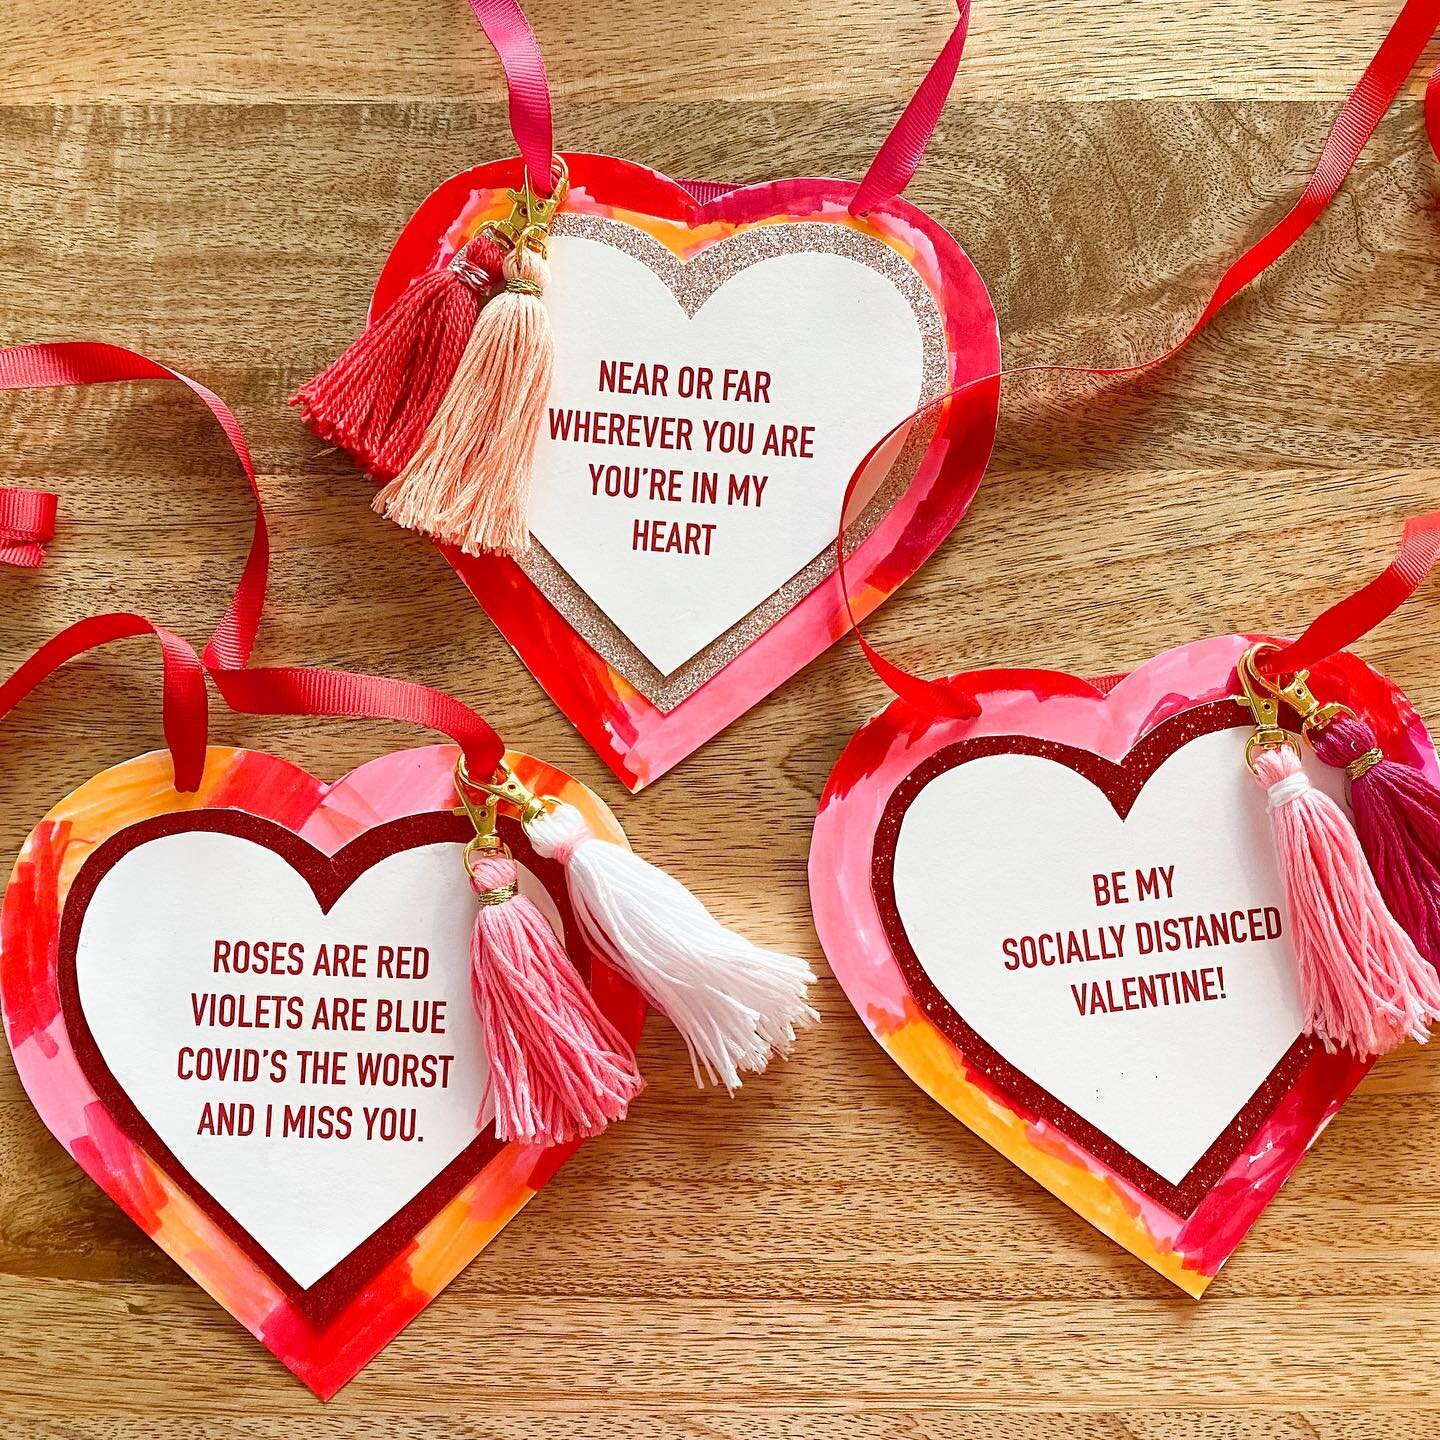 Roses are red, violets are blue, covid&rsquo;s the worst, and I miss you. These adorable door hanging Valentine&rsquo;s are surprisingly easy to make! Click the link in our profile to head over to the blog and make your own!
.
.
.
.
.
.
.
.
.
.
.
#va